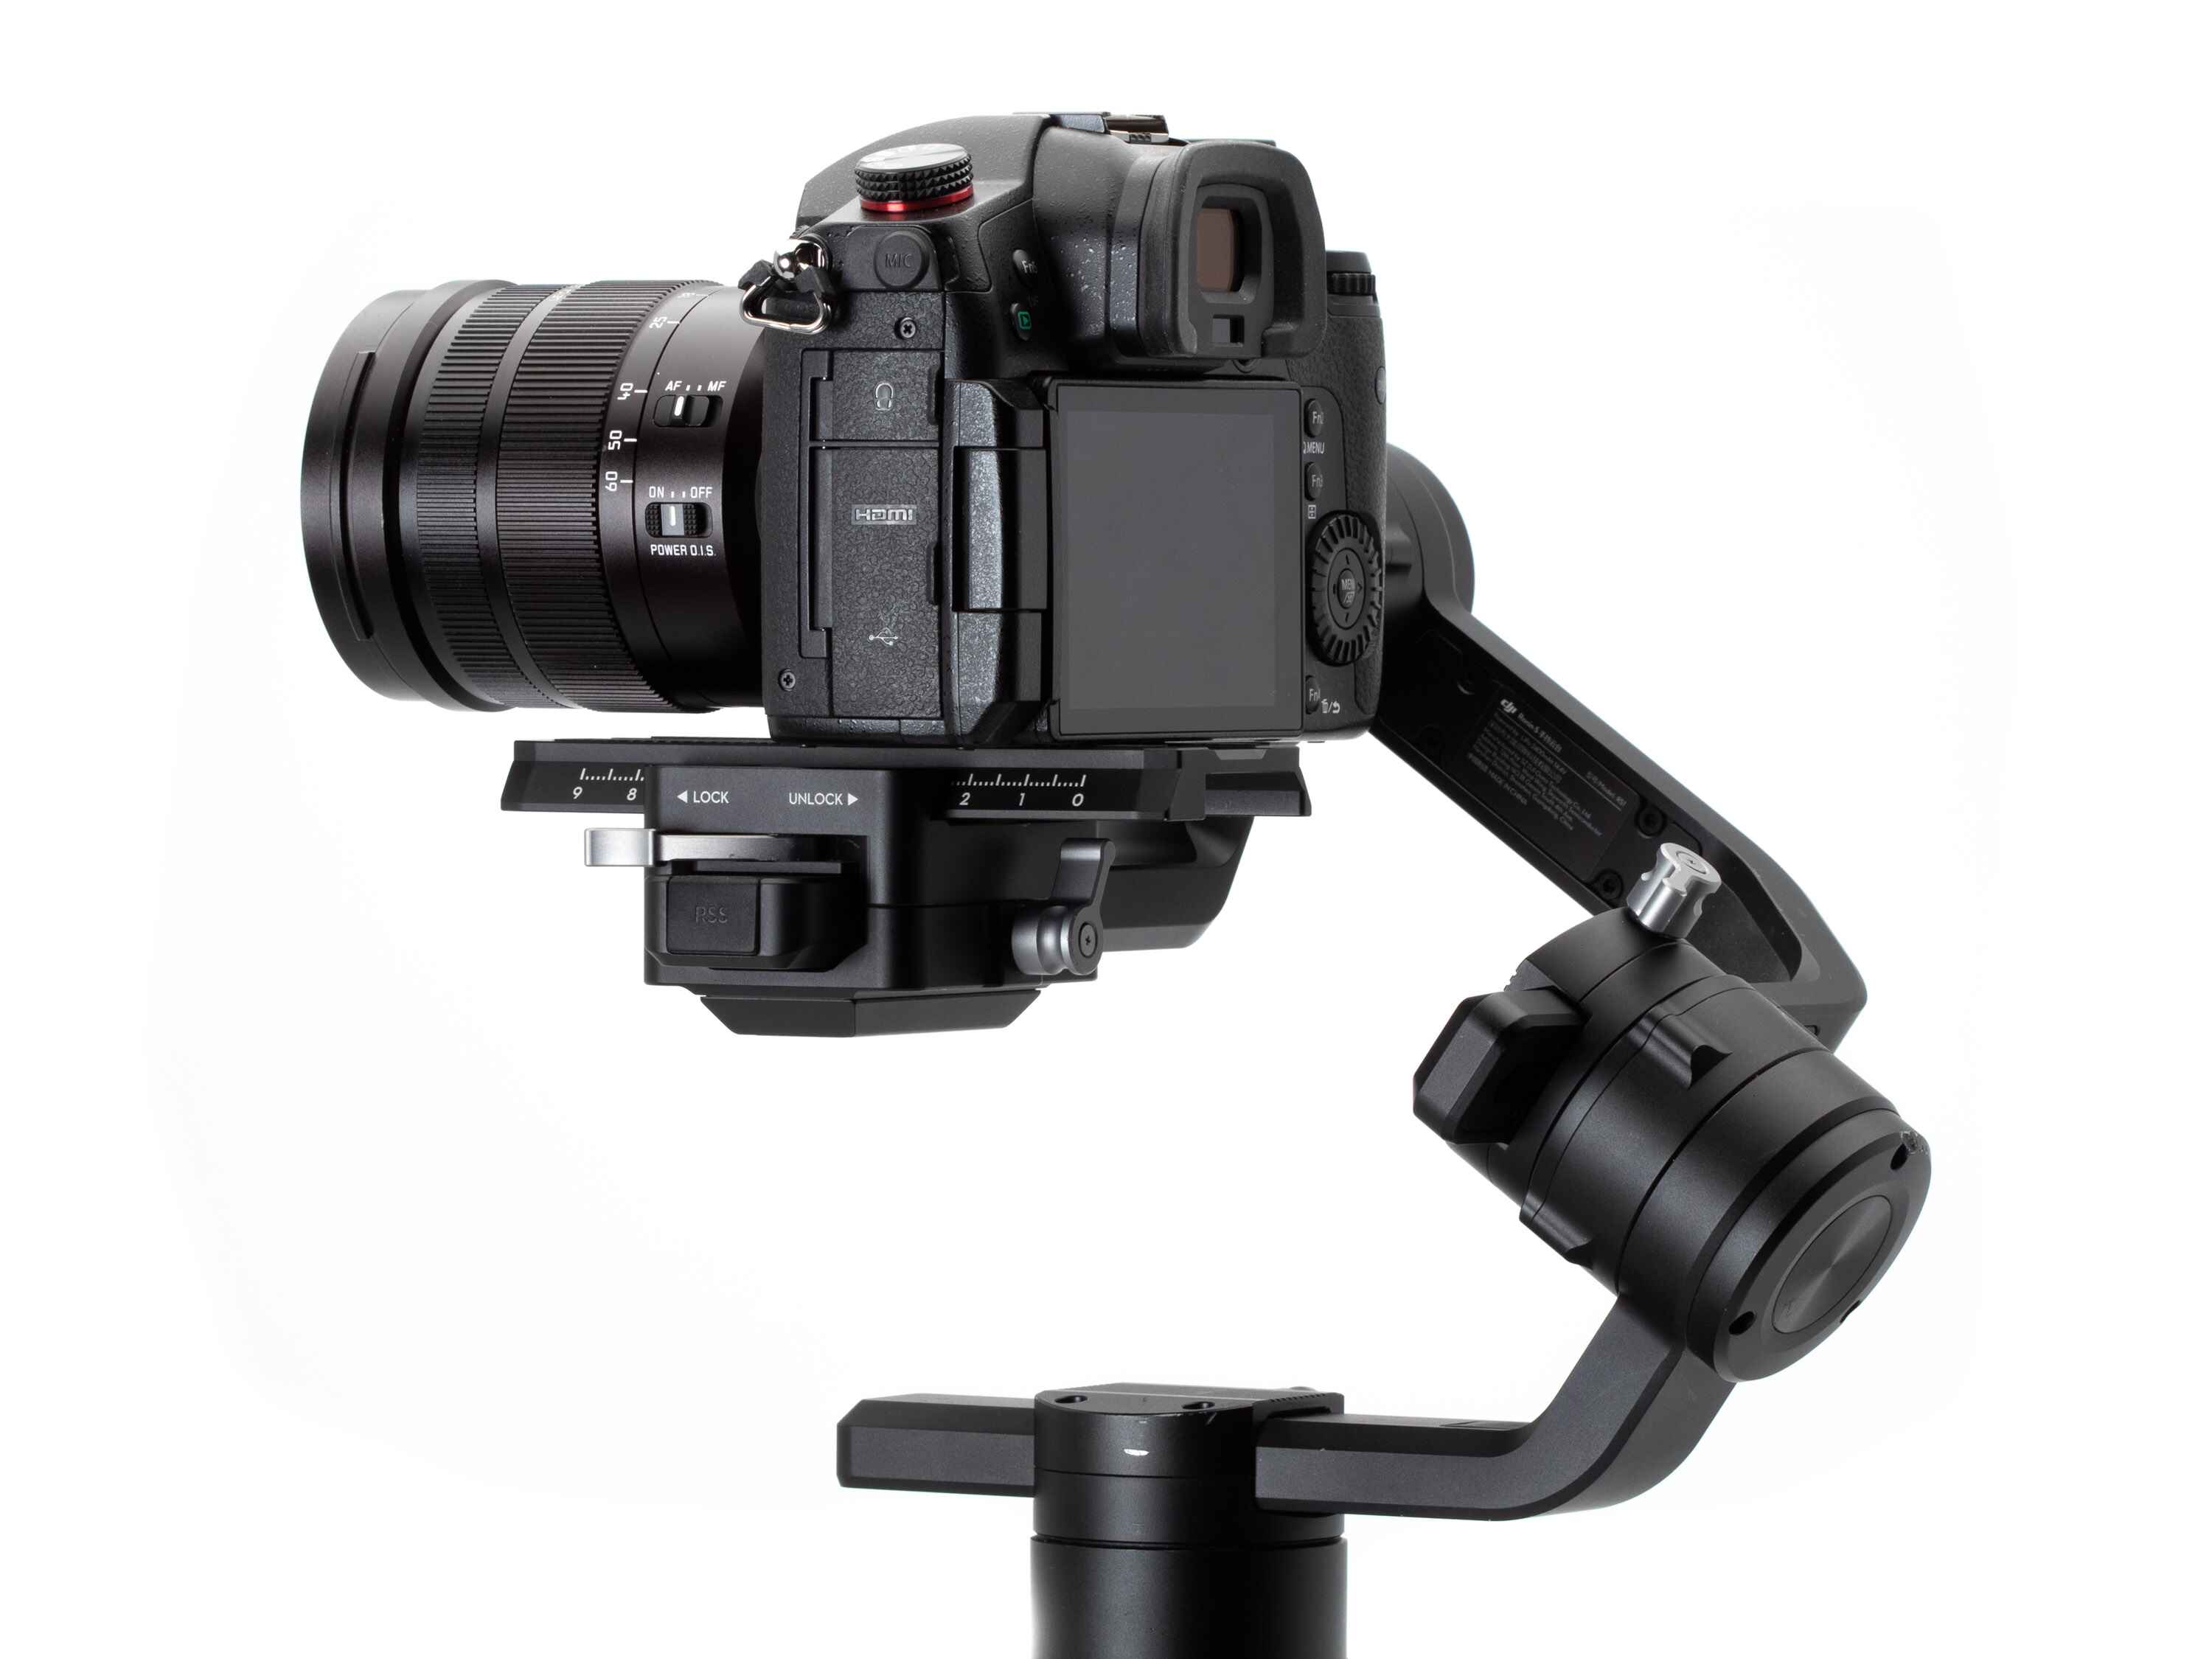 How To Use DJI Ronin S